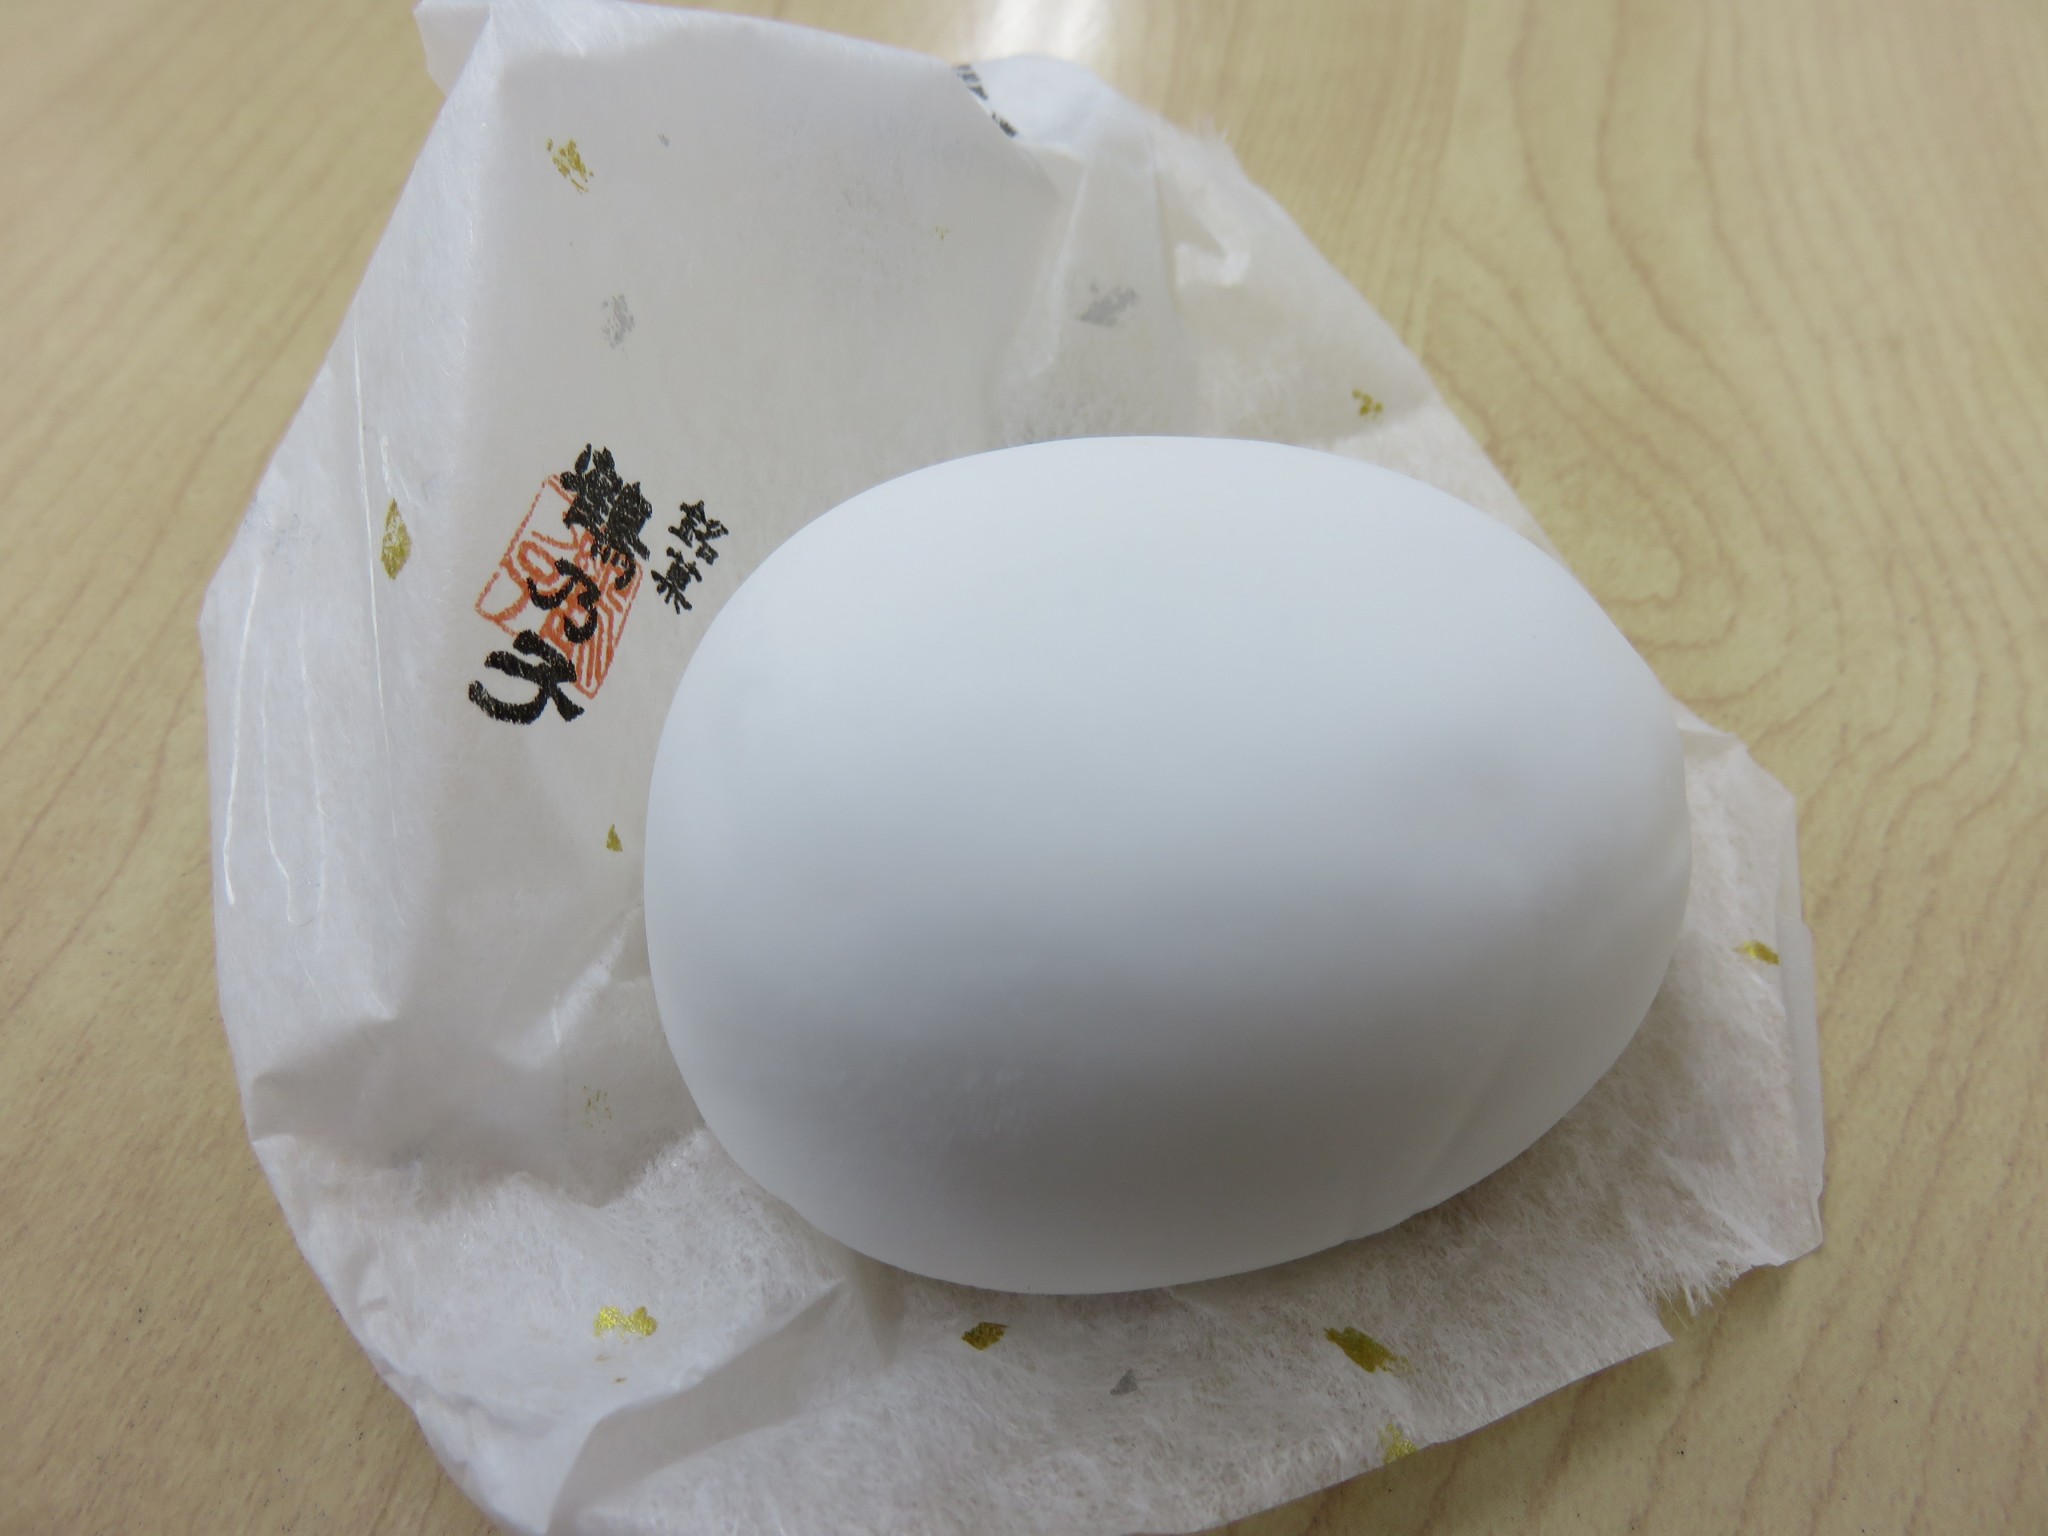 What does a marshmallow “egg” have to do with White Day?